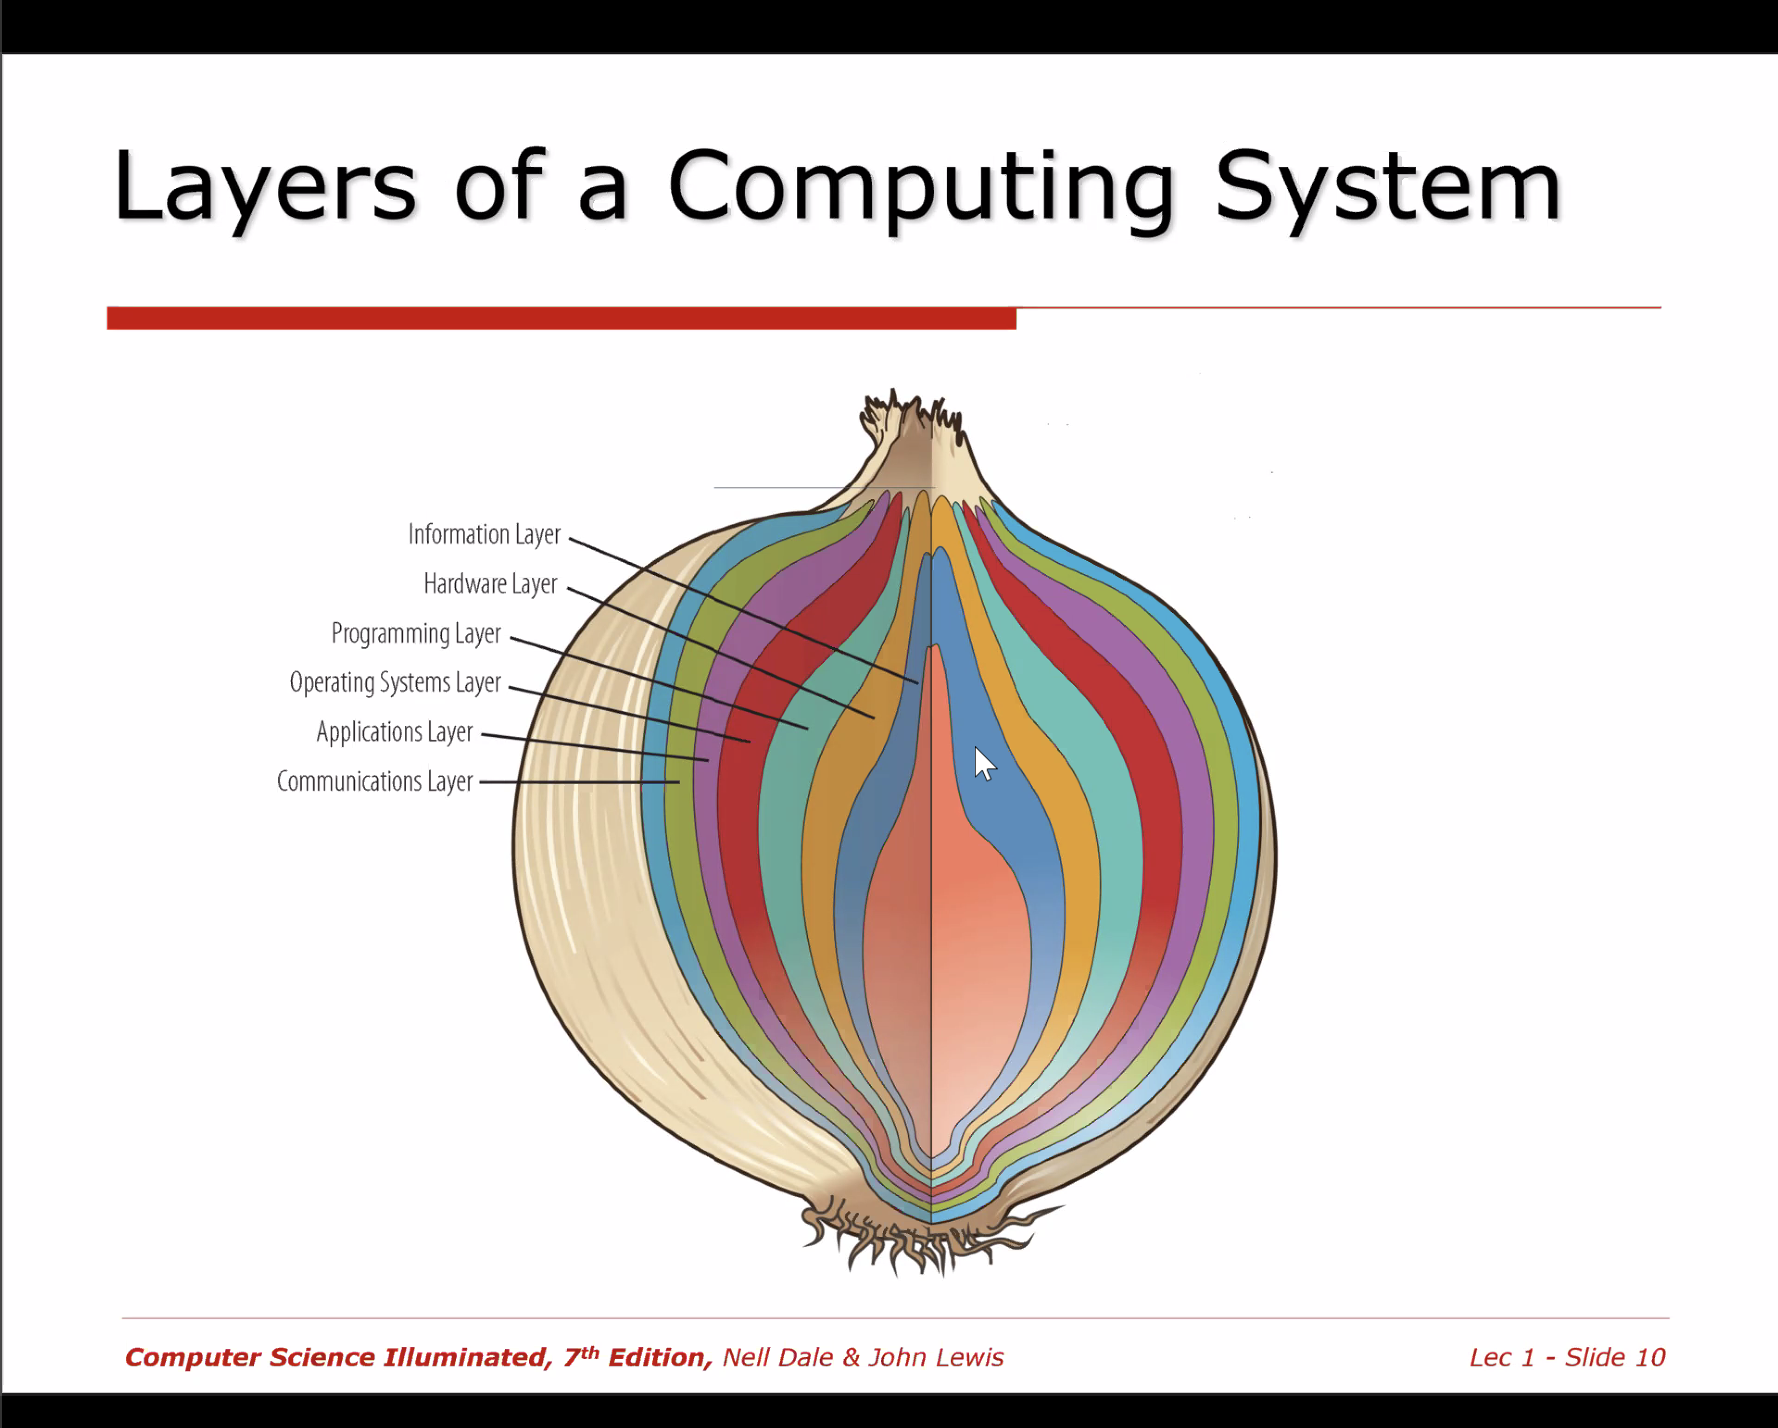 Layers of a Computing System